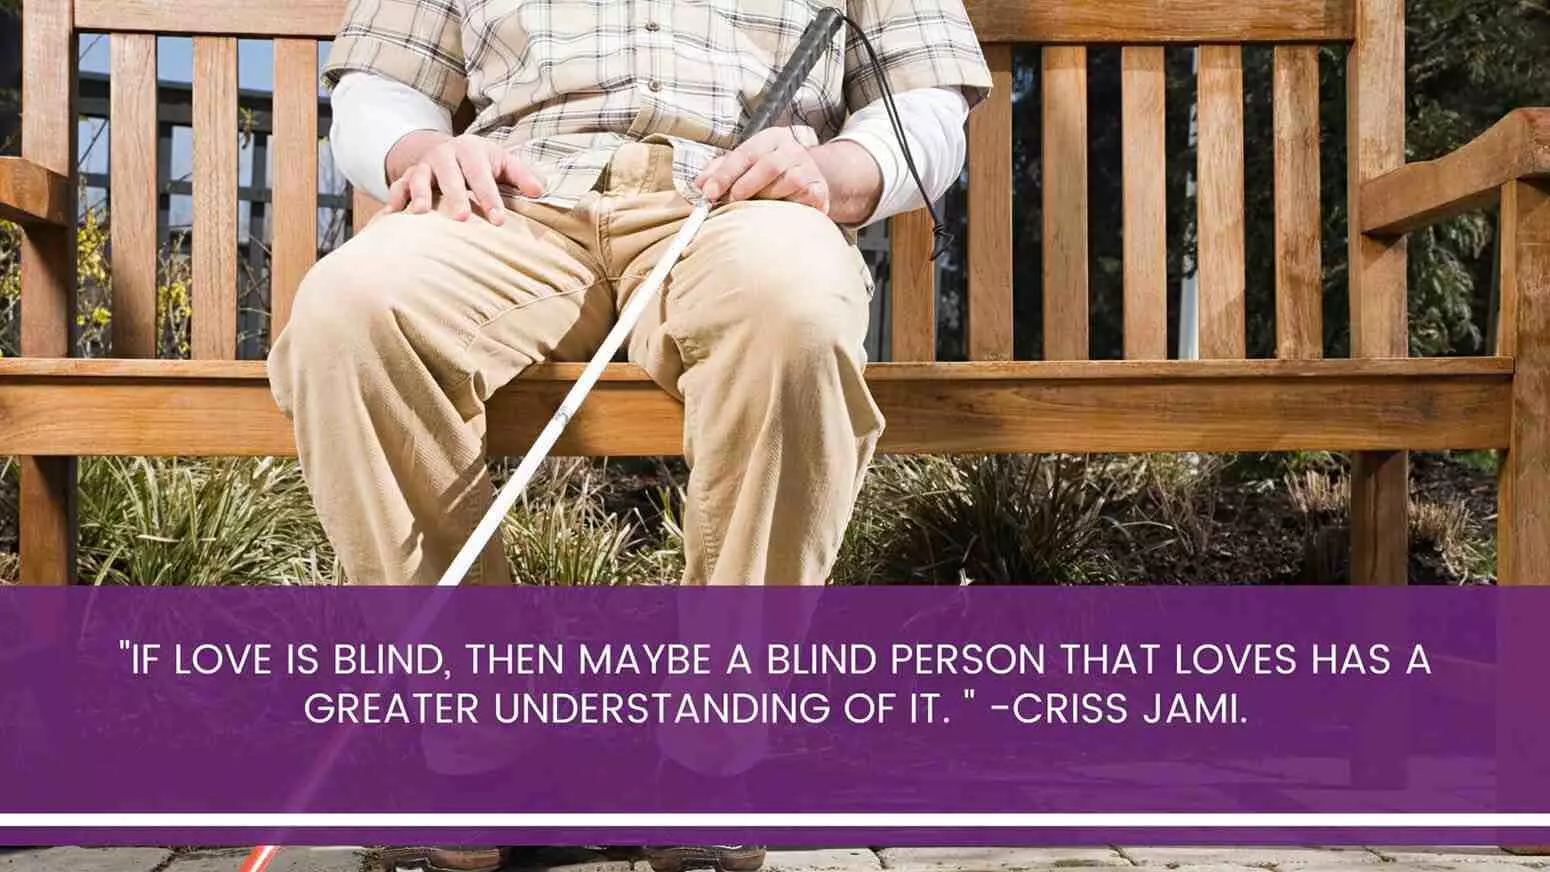 Knowing Blind People’s Lives: Getting Into the Light